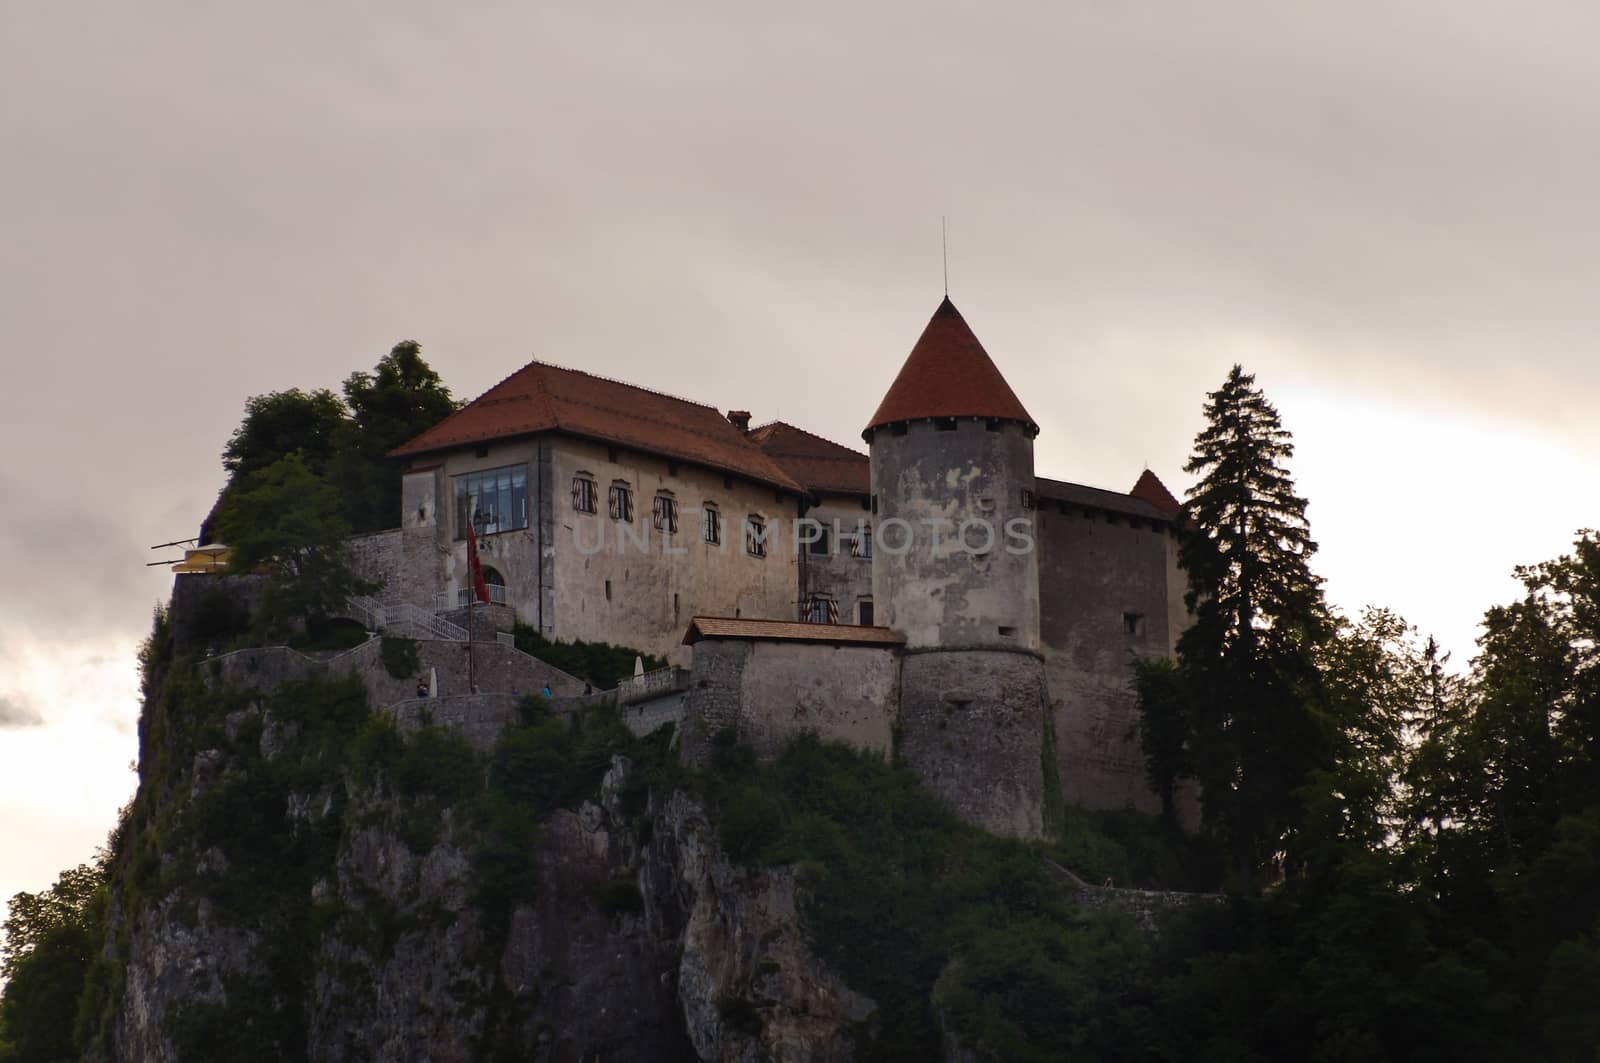 Bled castle, Slovenia in sunset by asafaric